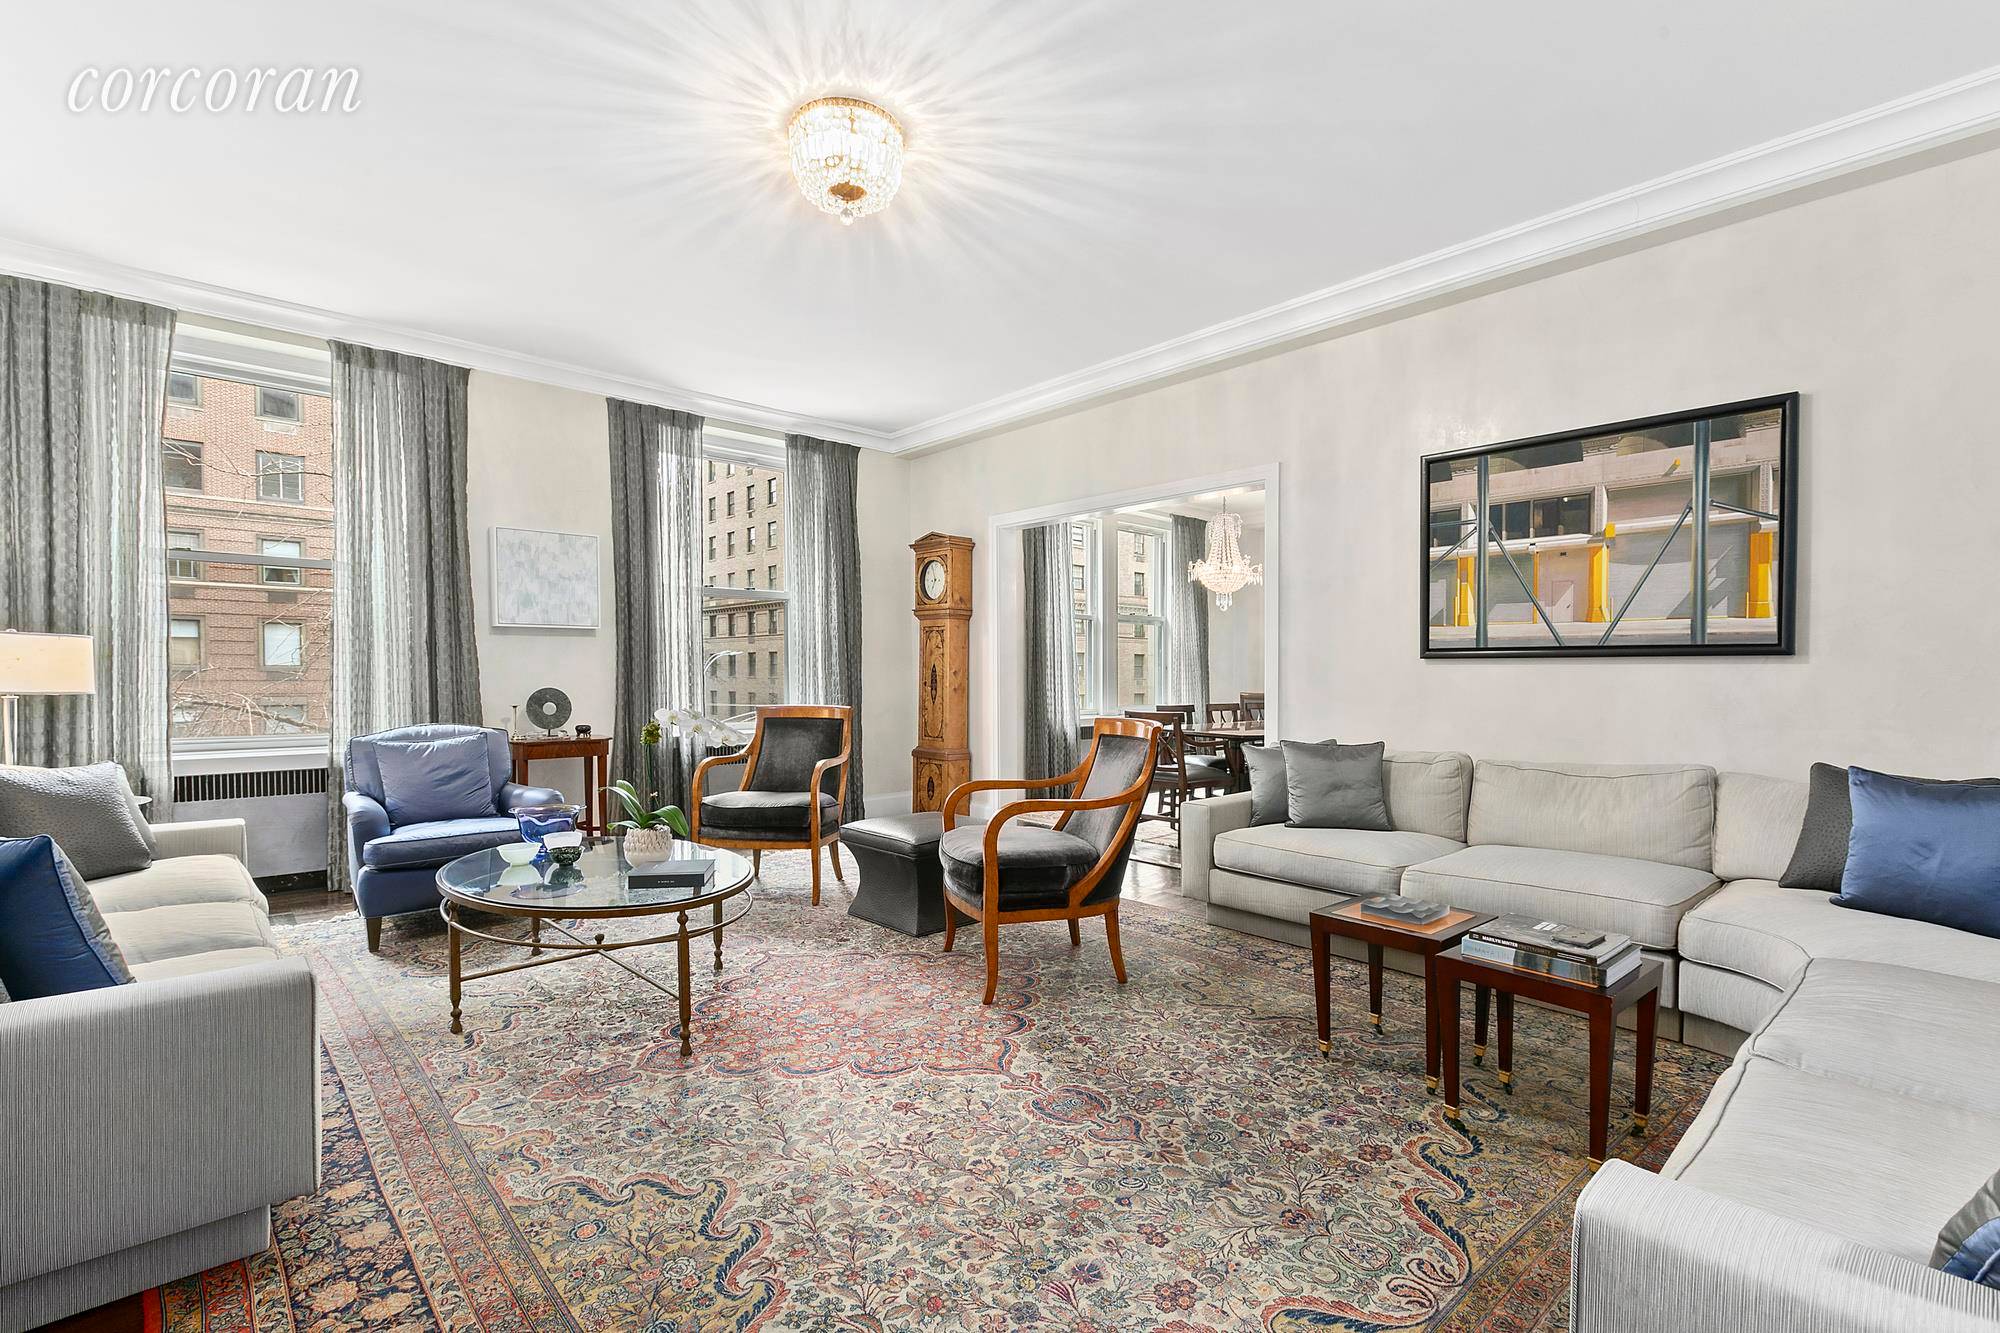 955 Park Avenue, Apartment 2EW, located on the 3rd floor, is a grand and beautiful full floor home that spans 75 overlooking Park Avenue.